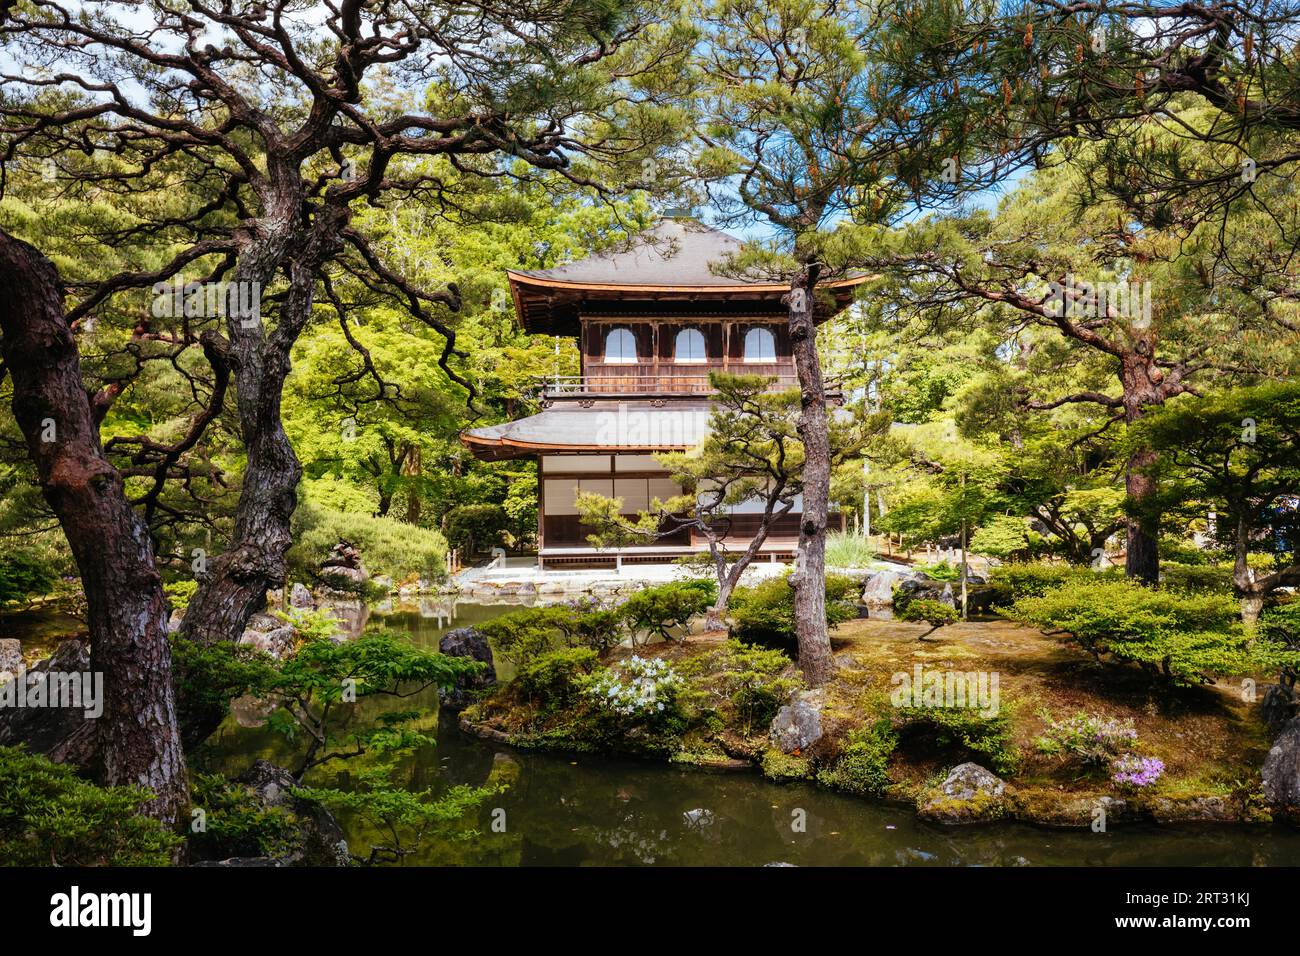 The stunning architecture and gardens at Silver Pavillion Ginkakuji ...